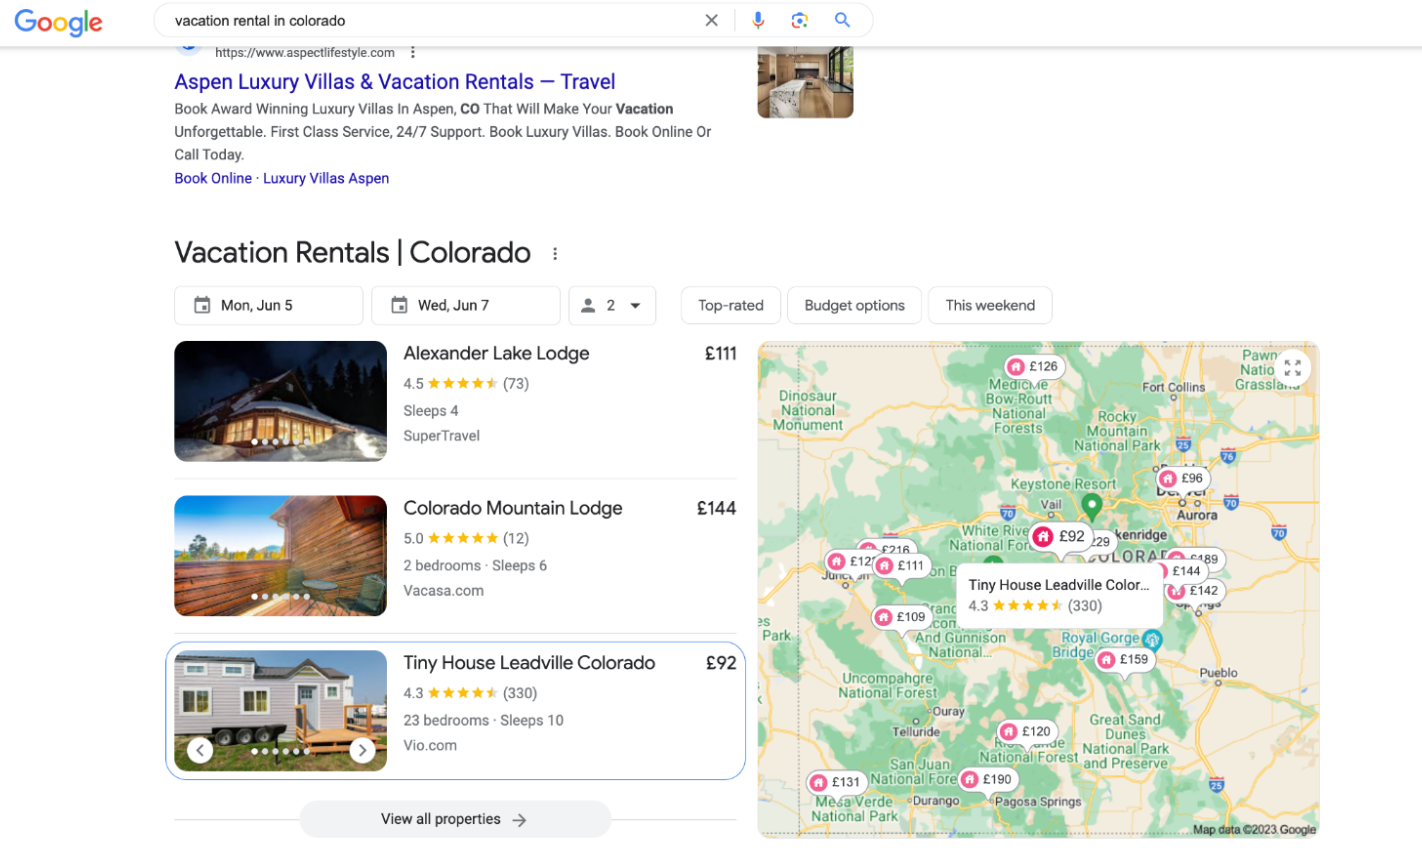 Google Search results for “vacation rental in Colorado”